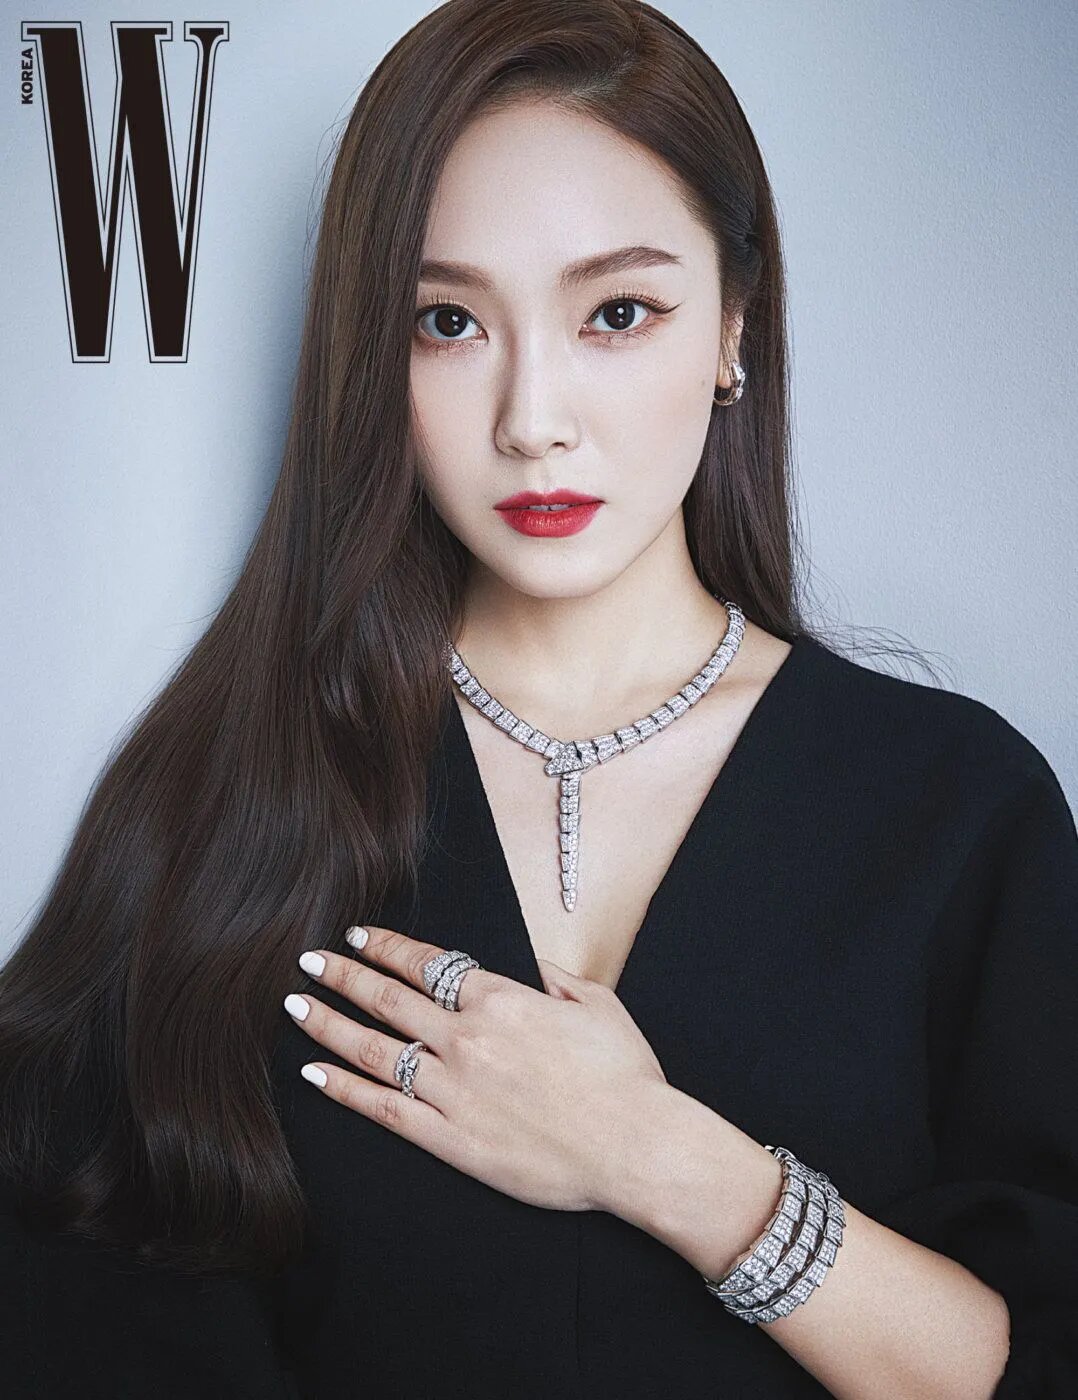 Jessica Jung x Bvlgari for W Korea 'Love Your W' December 2020 Issue |  Kpopping